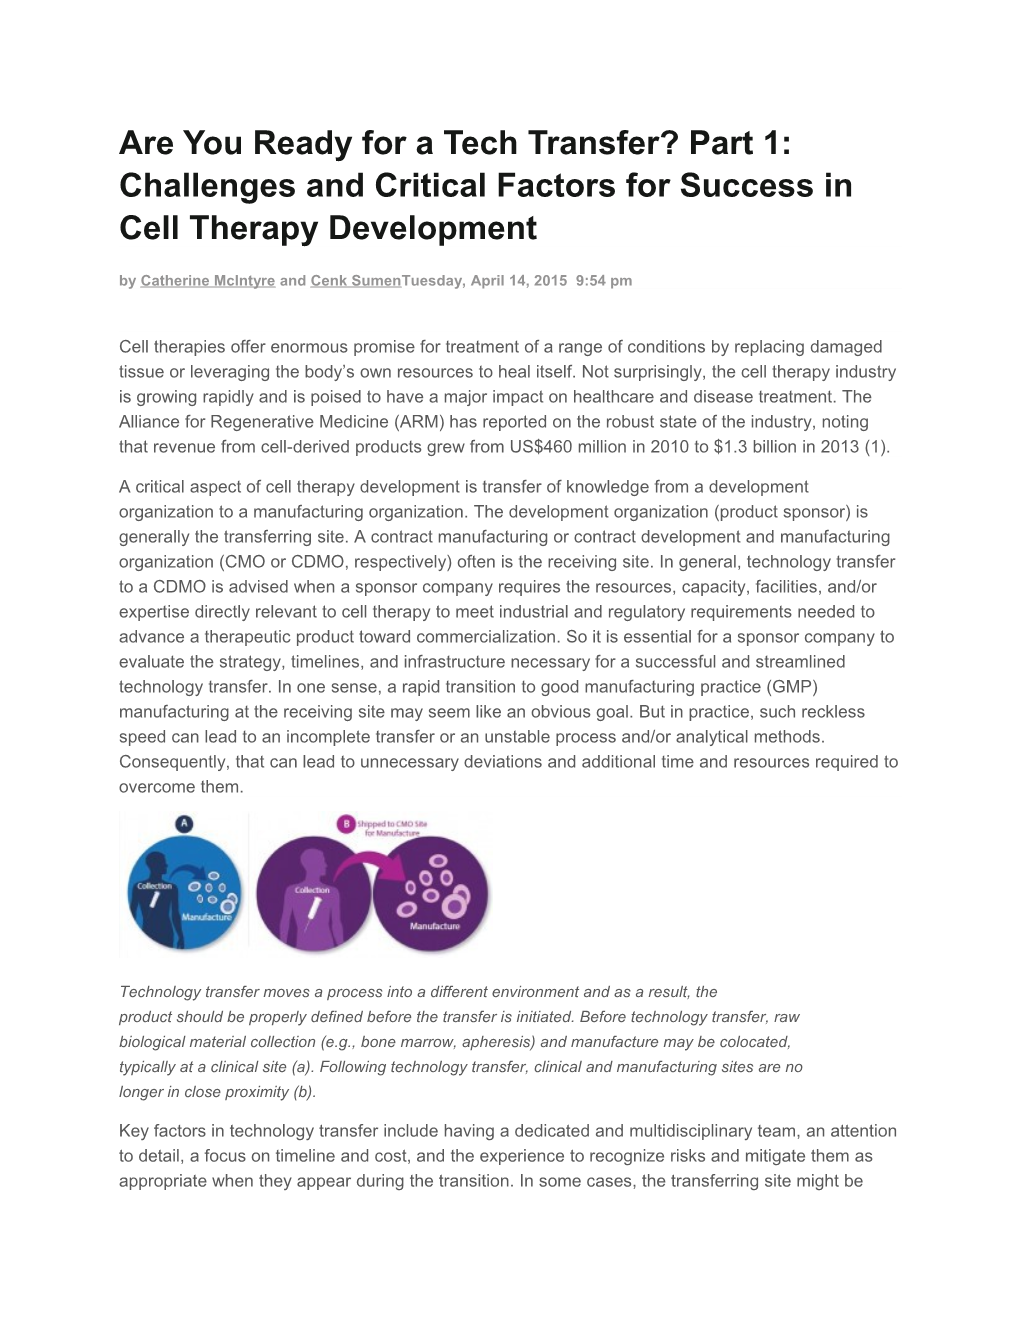 Are You Ready for a Tech Transfer? Part 1: Challenges and Critical Factors for Success